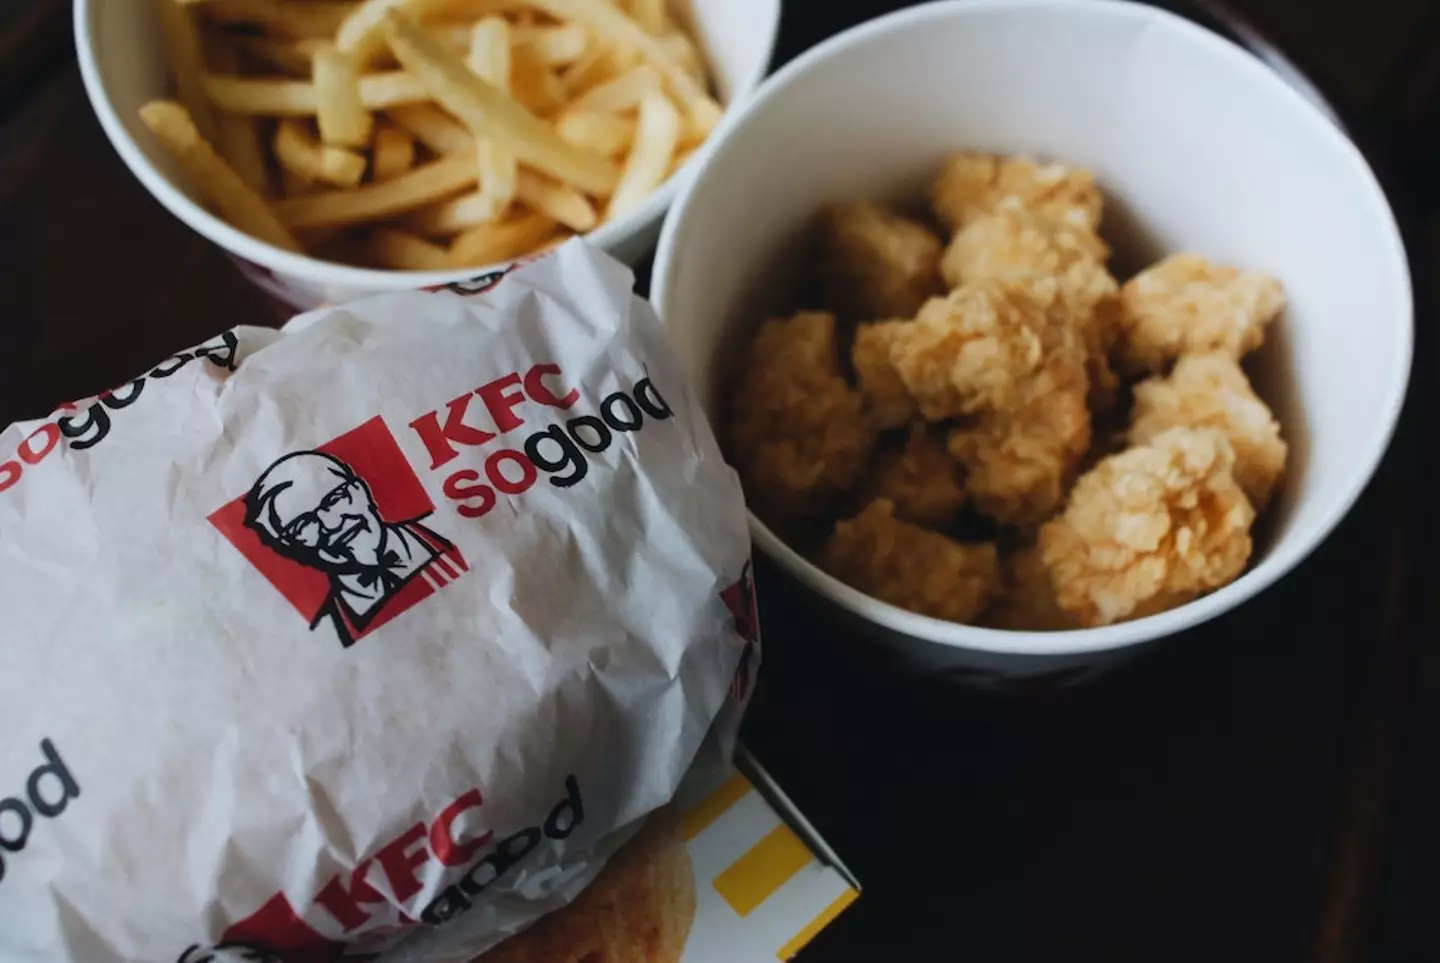 KFC's herbs and spices blend has been kept a secret for decades.